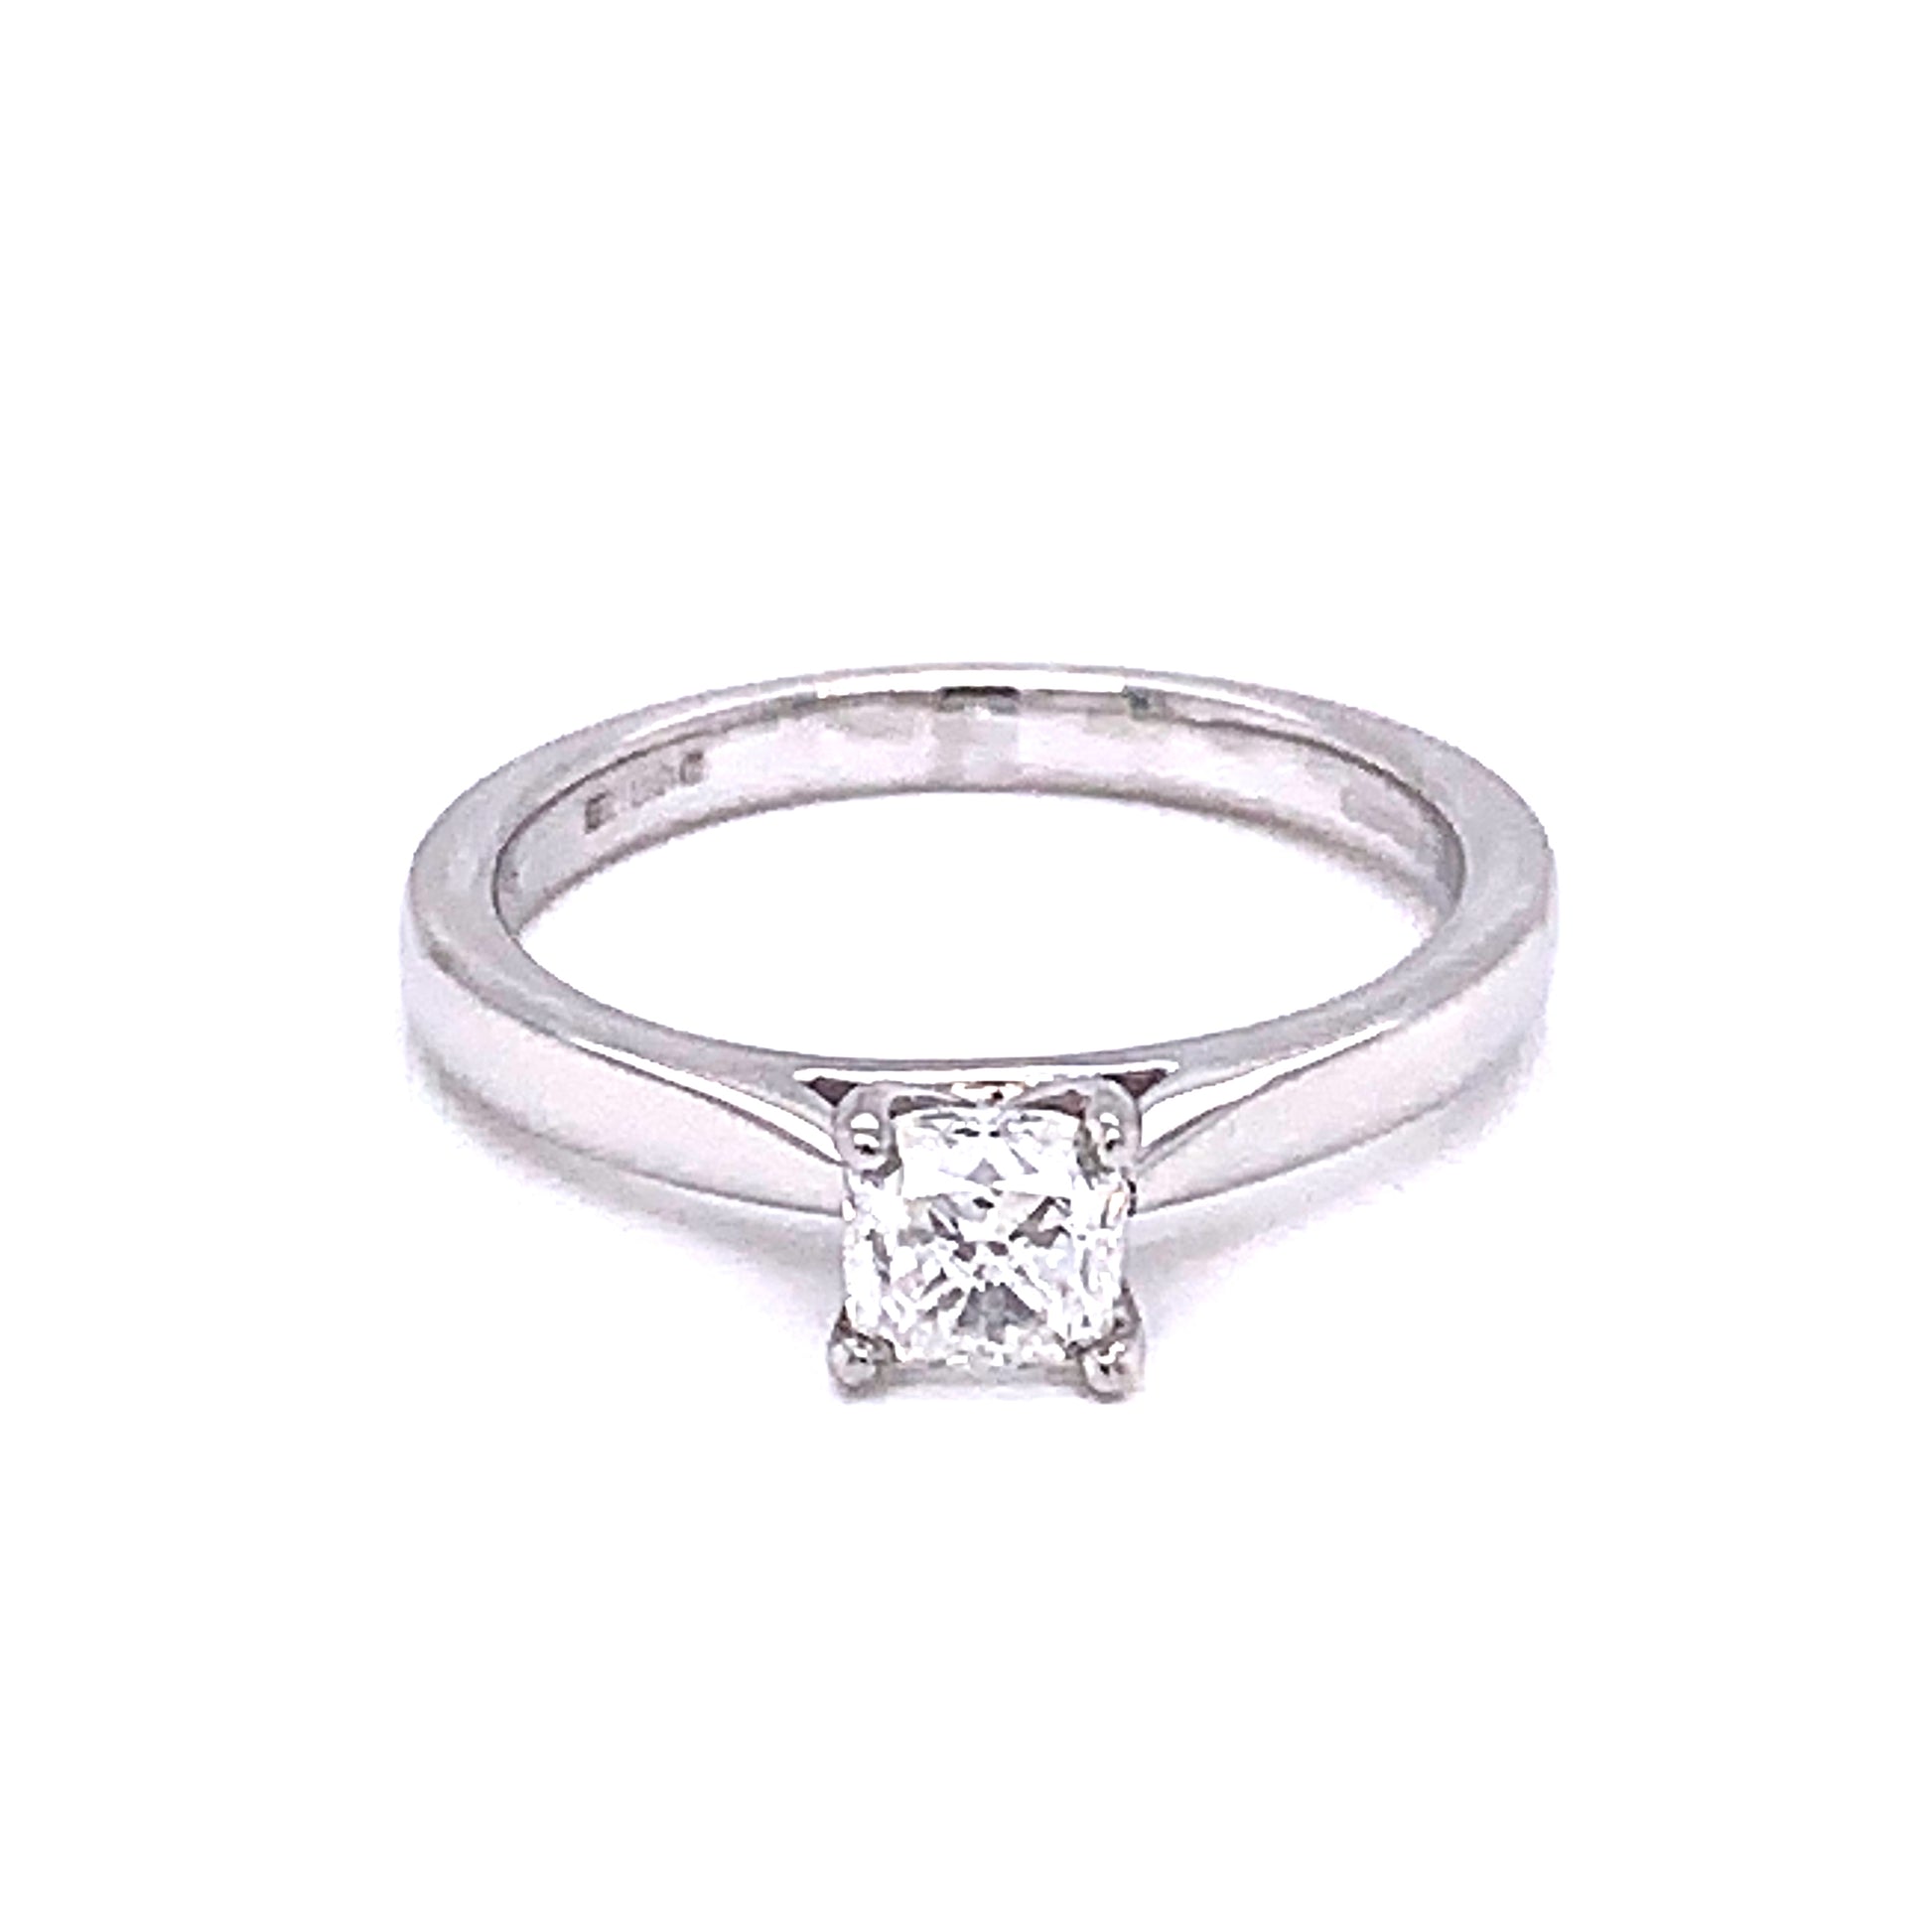 Cushion Cut Diamond Solitaire Ring - 0.51cts  gardiner-brothers   